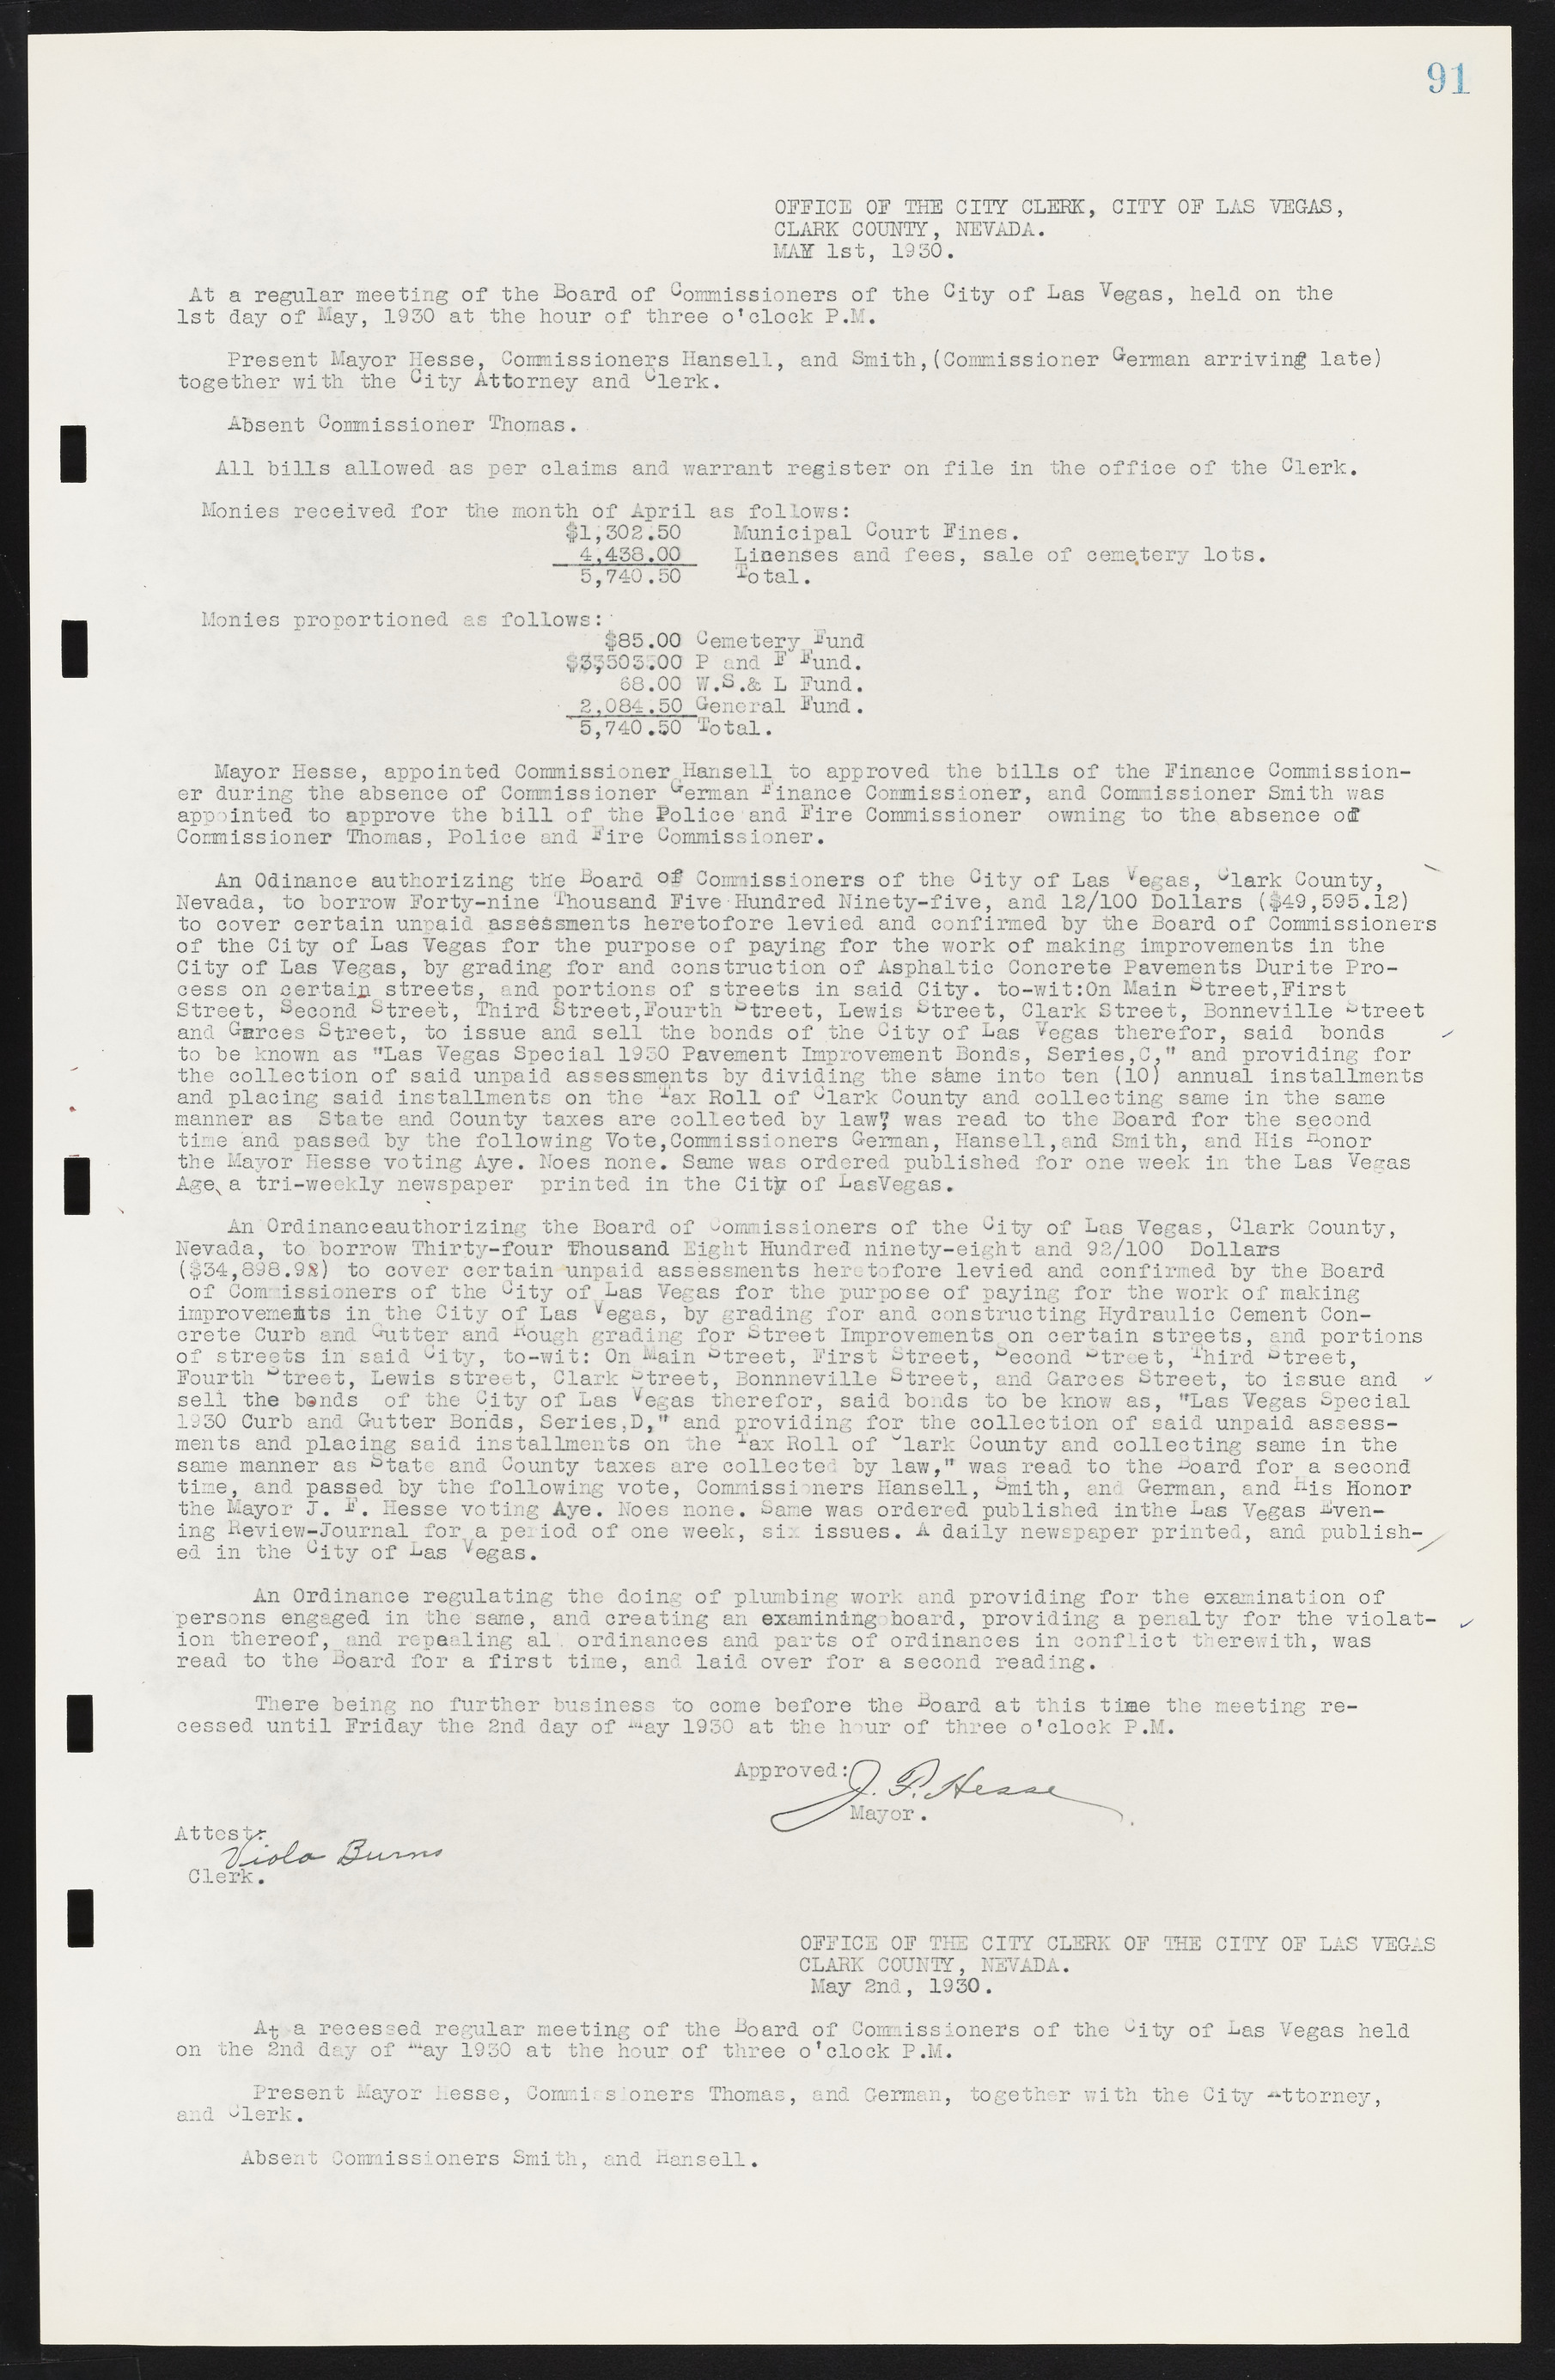 Las Vegas City Commission Minutes, May 14, 1929 to February 11, 1937, lvc000003-97